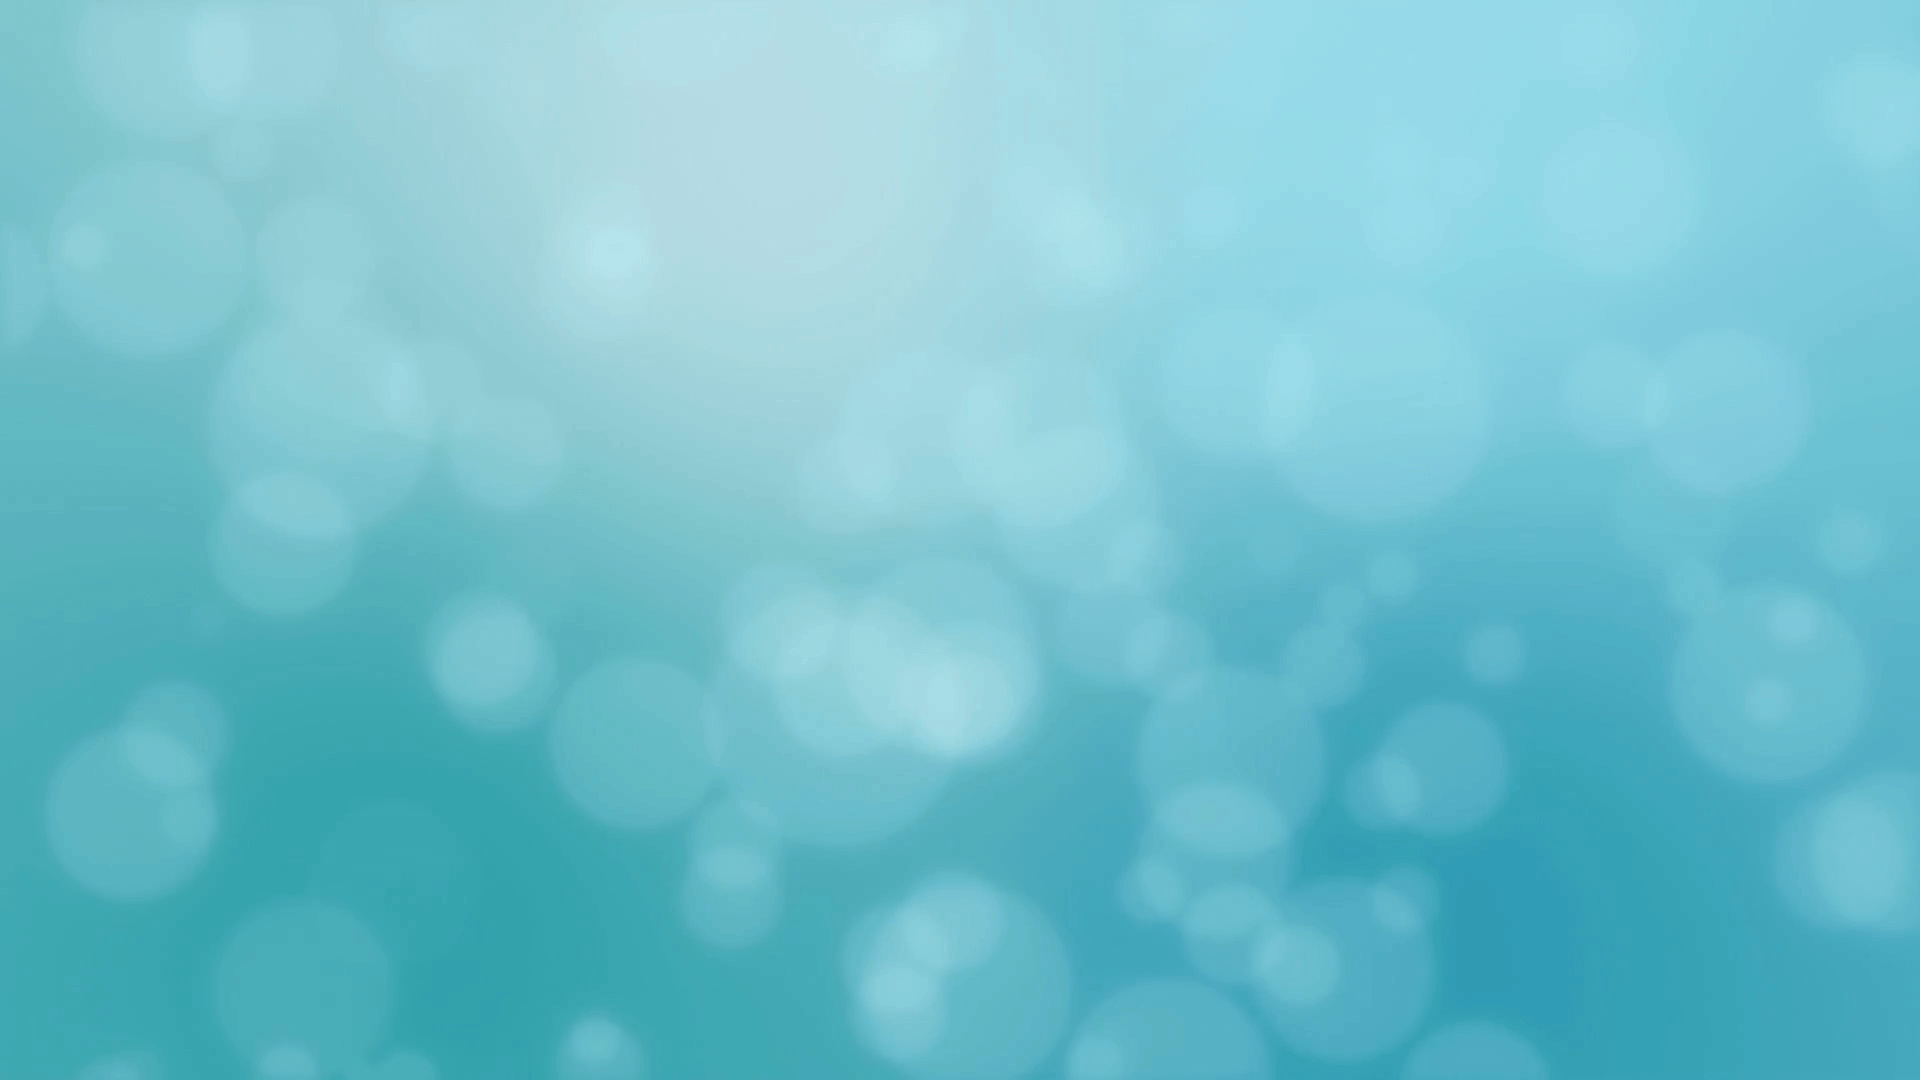 Beautiful Teal Blue Blurred Bokeh Glowing Particles Motion